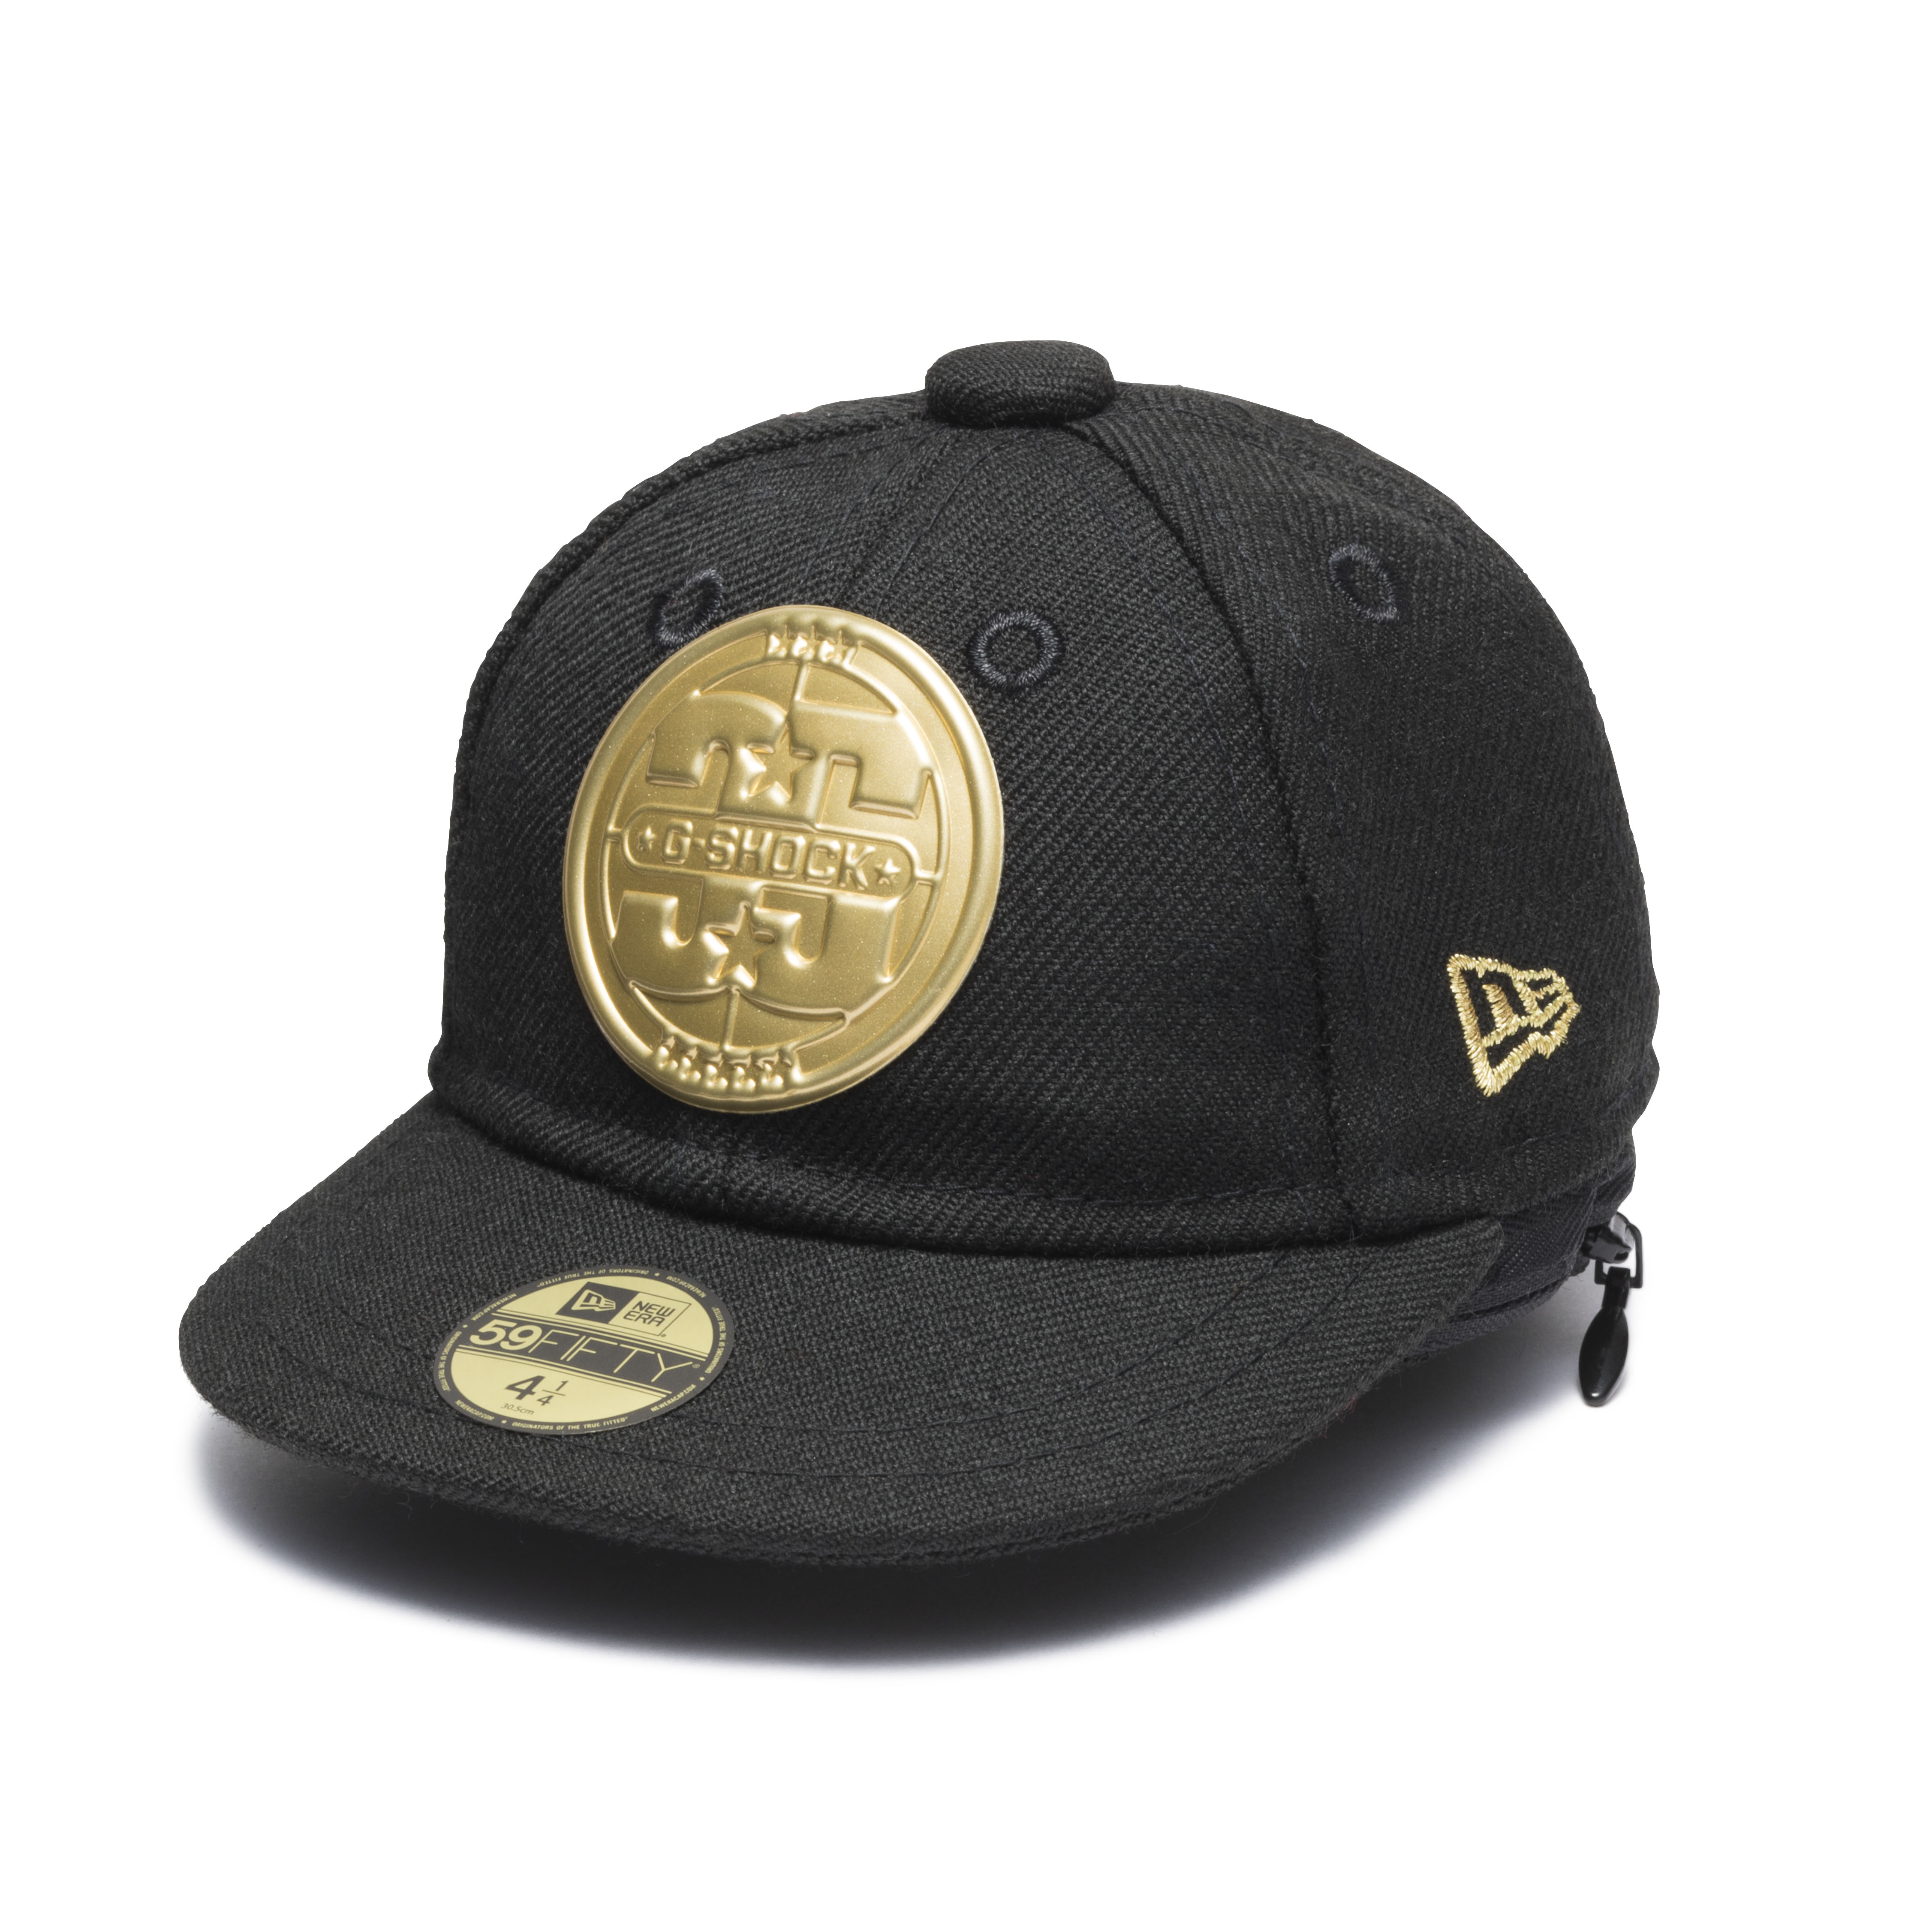 New Era 24-Pack CAP CARRIER Black Transport Protect Store Fitted Caps Snap Hats